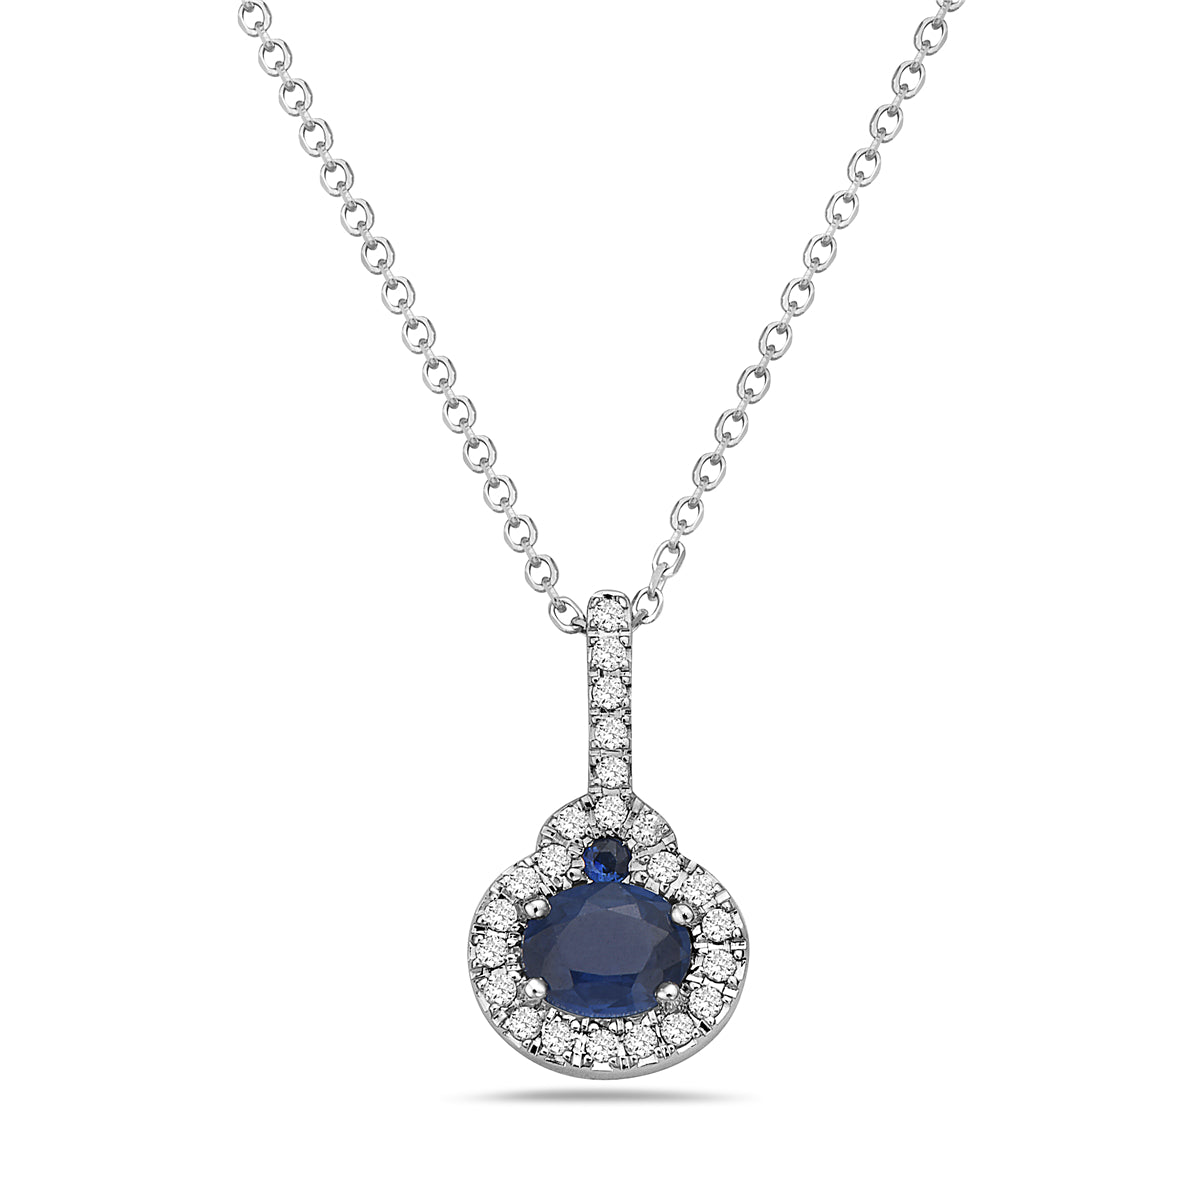 WHITE GOLD SAPPHIRE NECKLACE